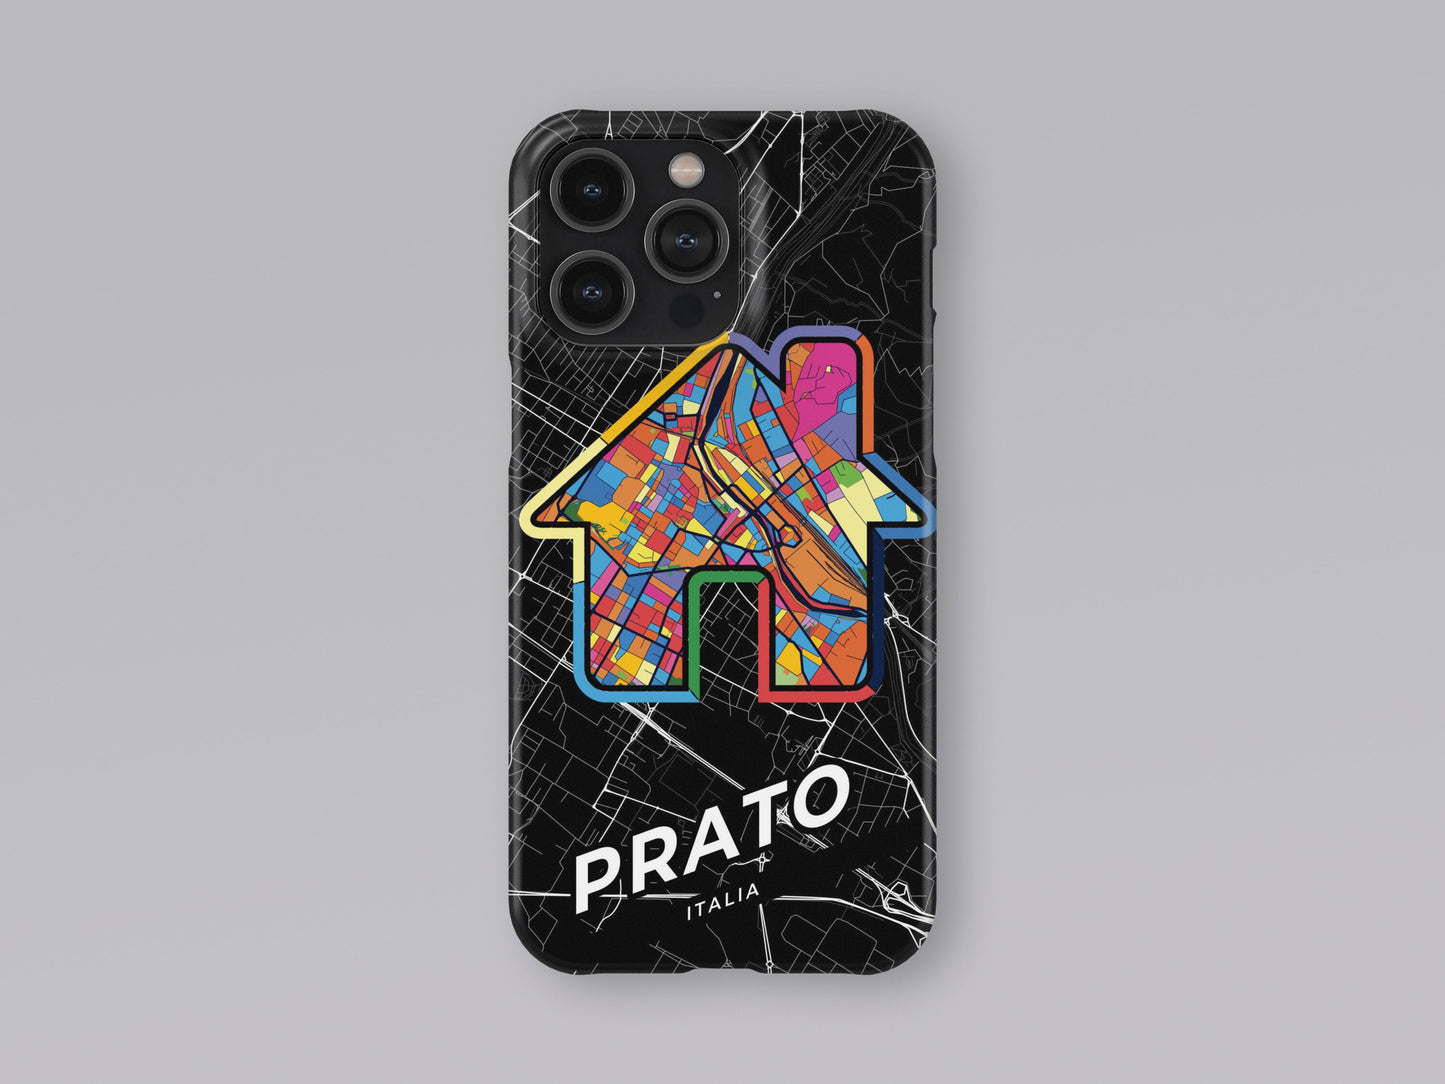 Prato Italy slim phone case with colorful icon. Birthday, wedding or housewarming gift. Couple match cases. 3